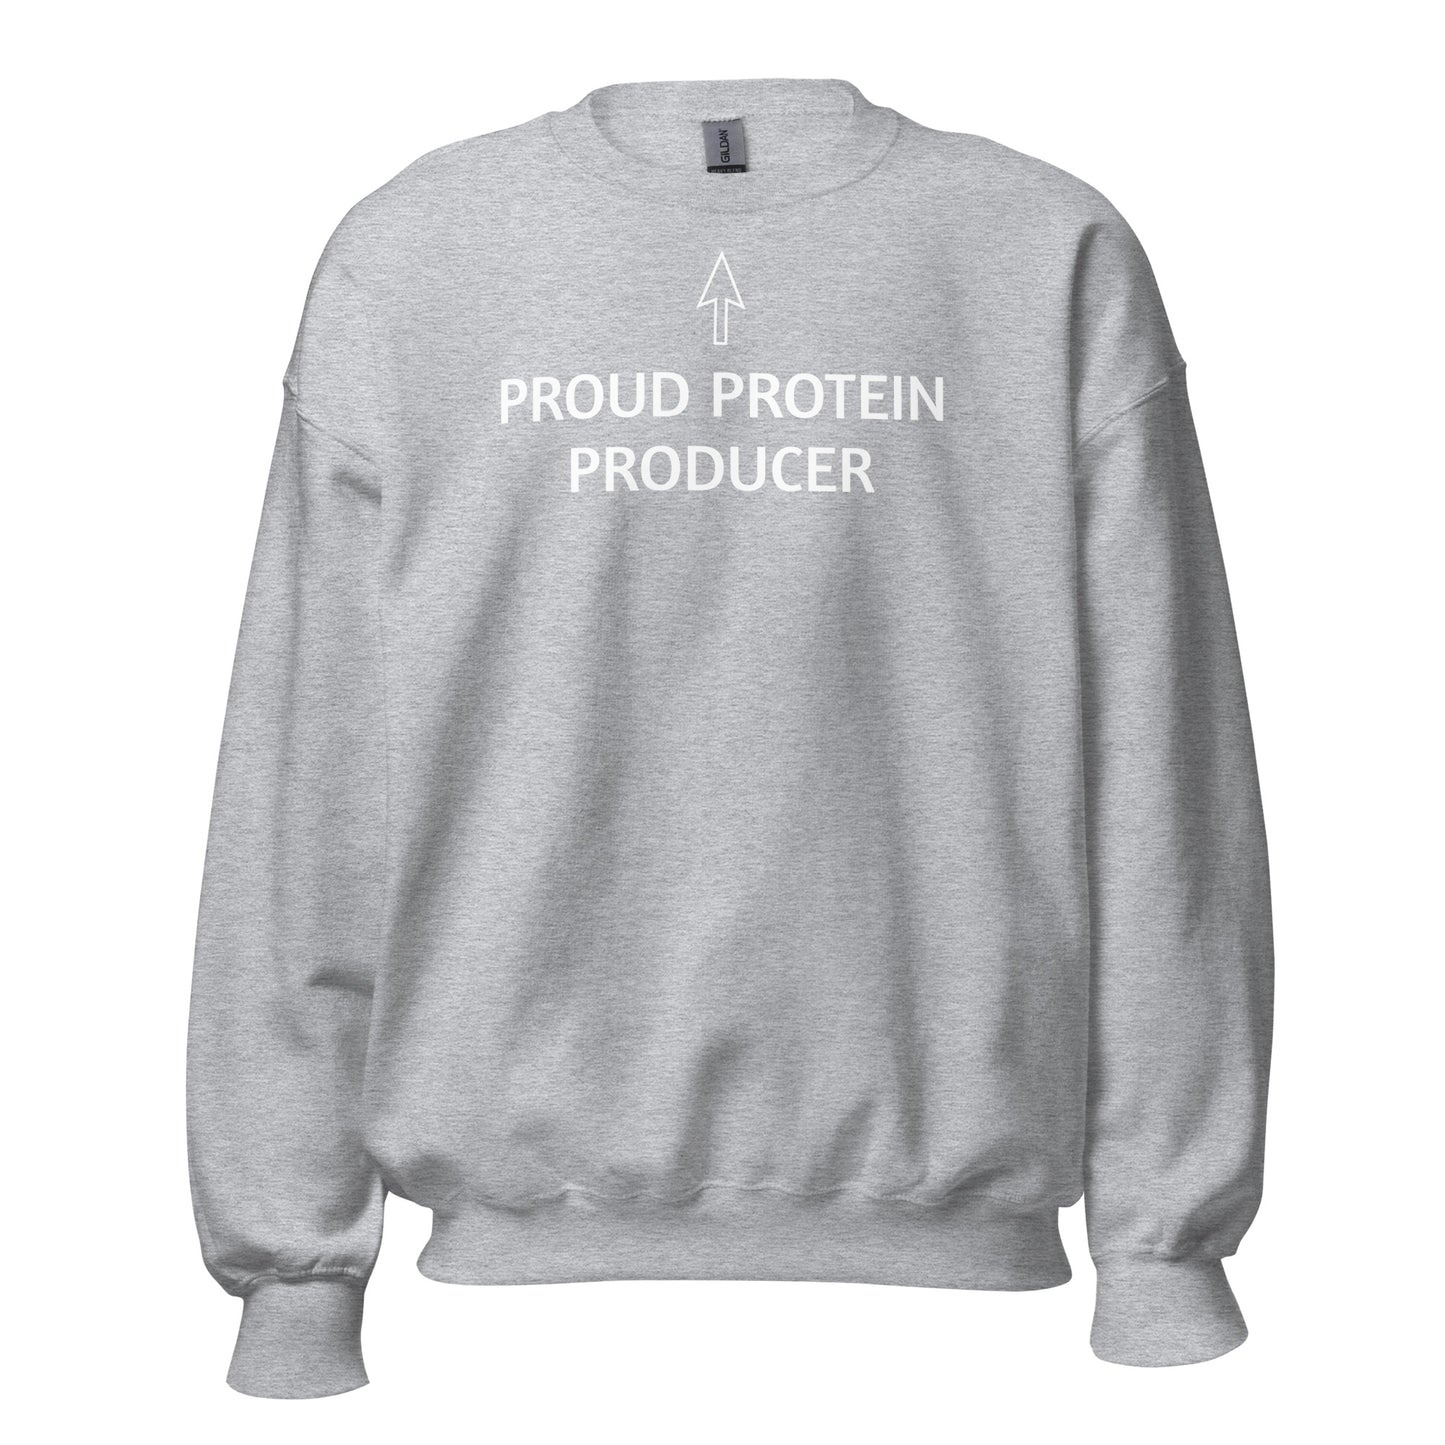 PROUD PROTEIN PRODUCER